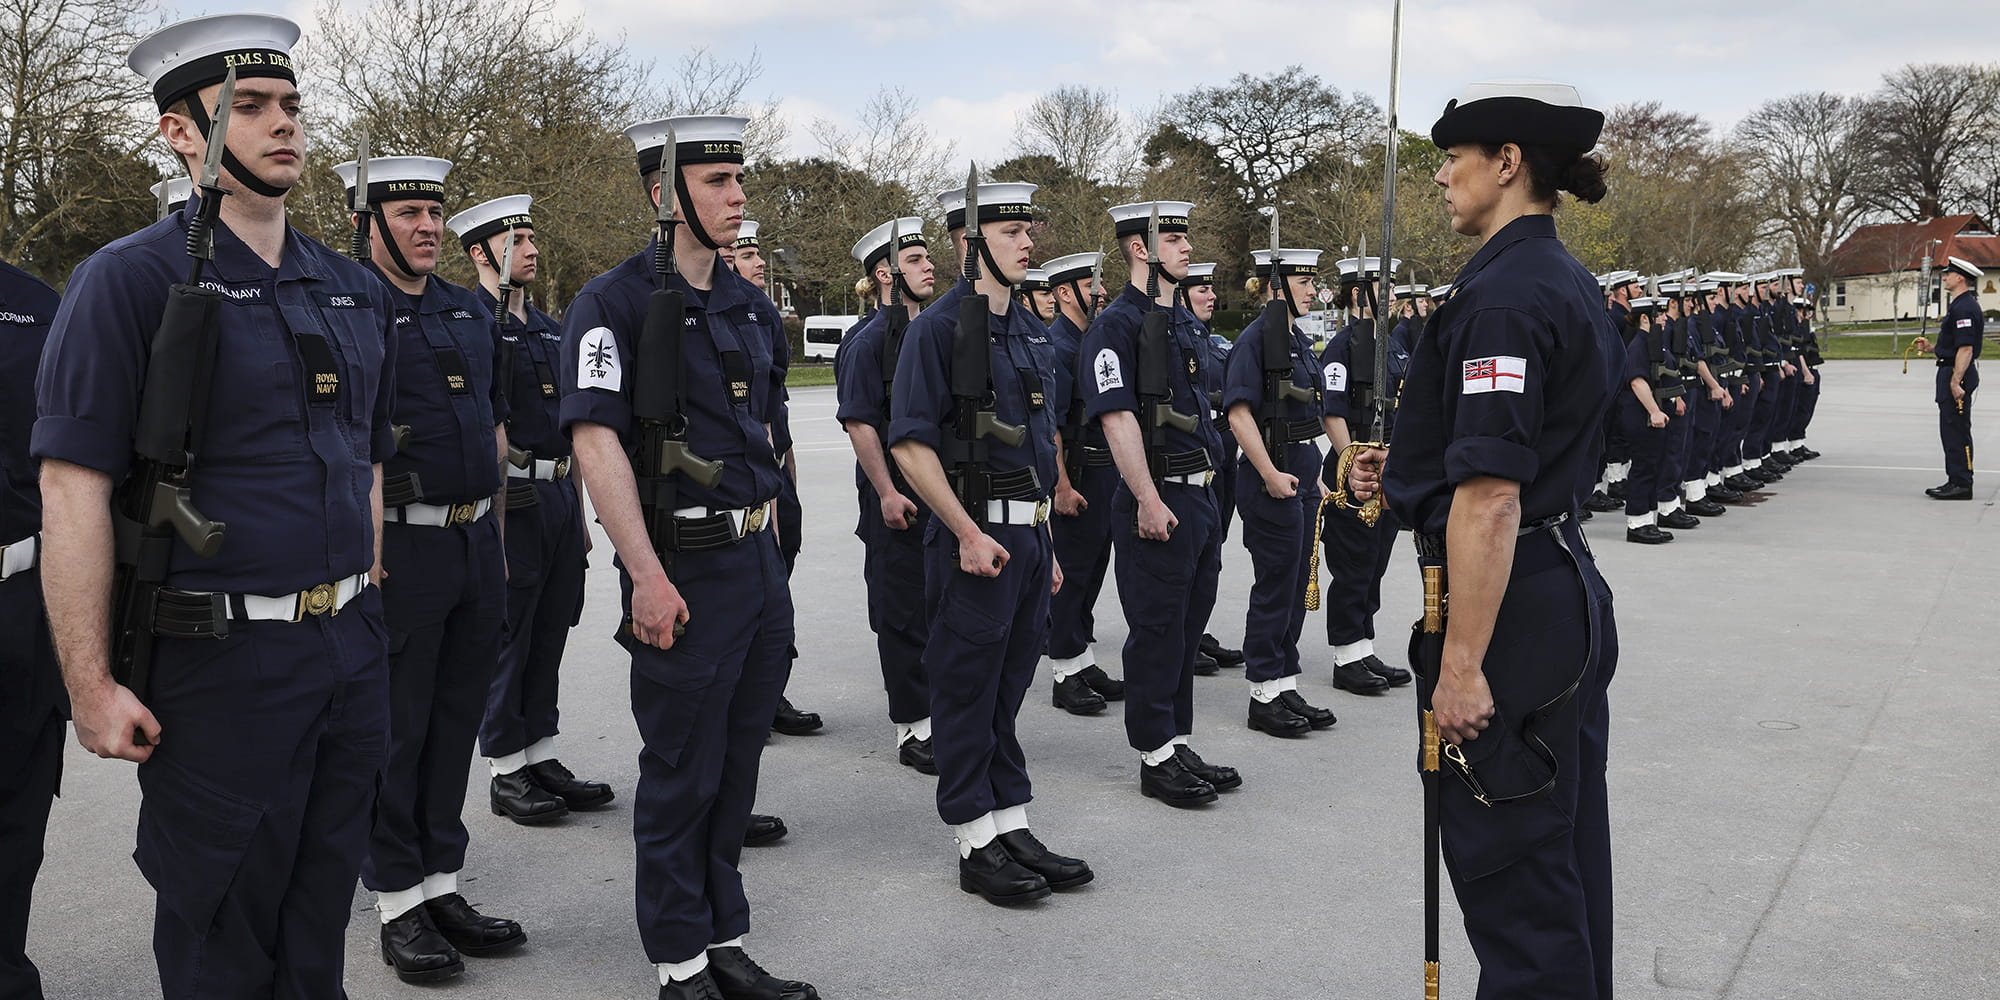 Sailors carry out drill practice on HMS Excellent parade ground